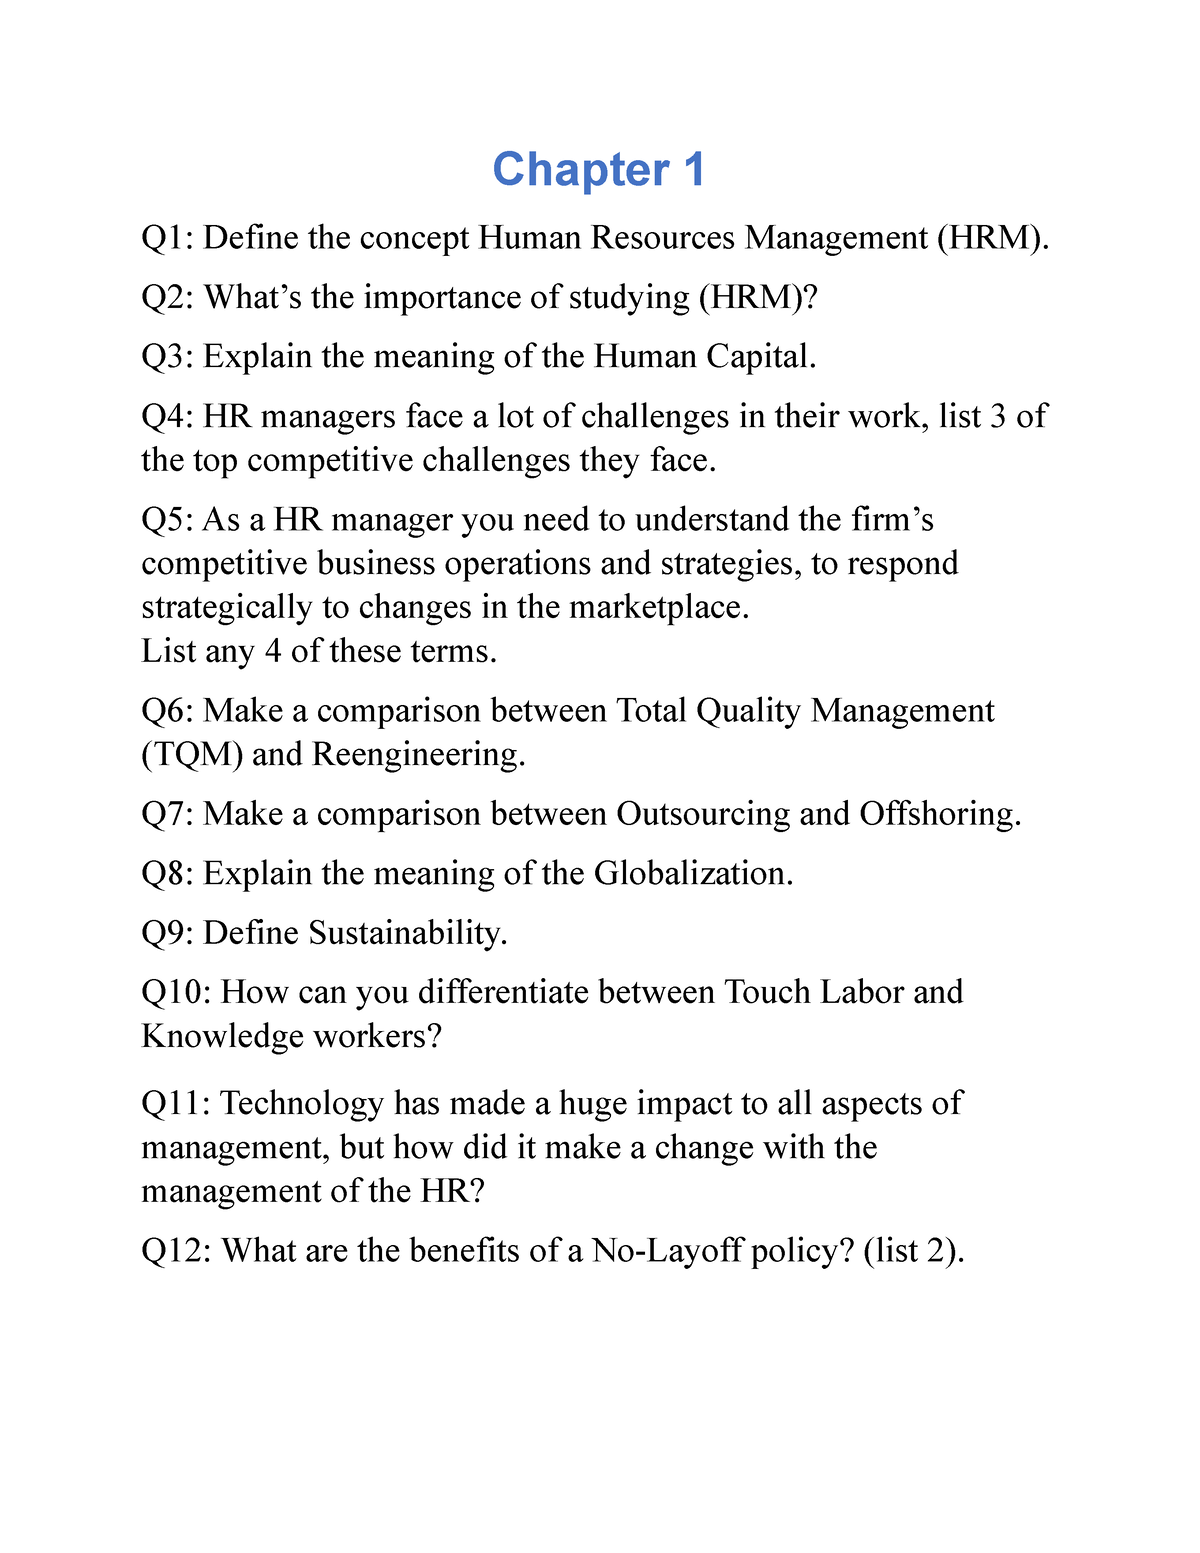 essay-questions-for-chapter-1-chapter-1-q1-define-the-concept-human